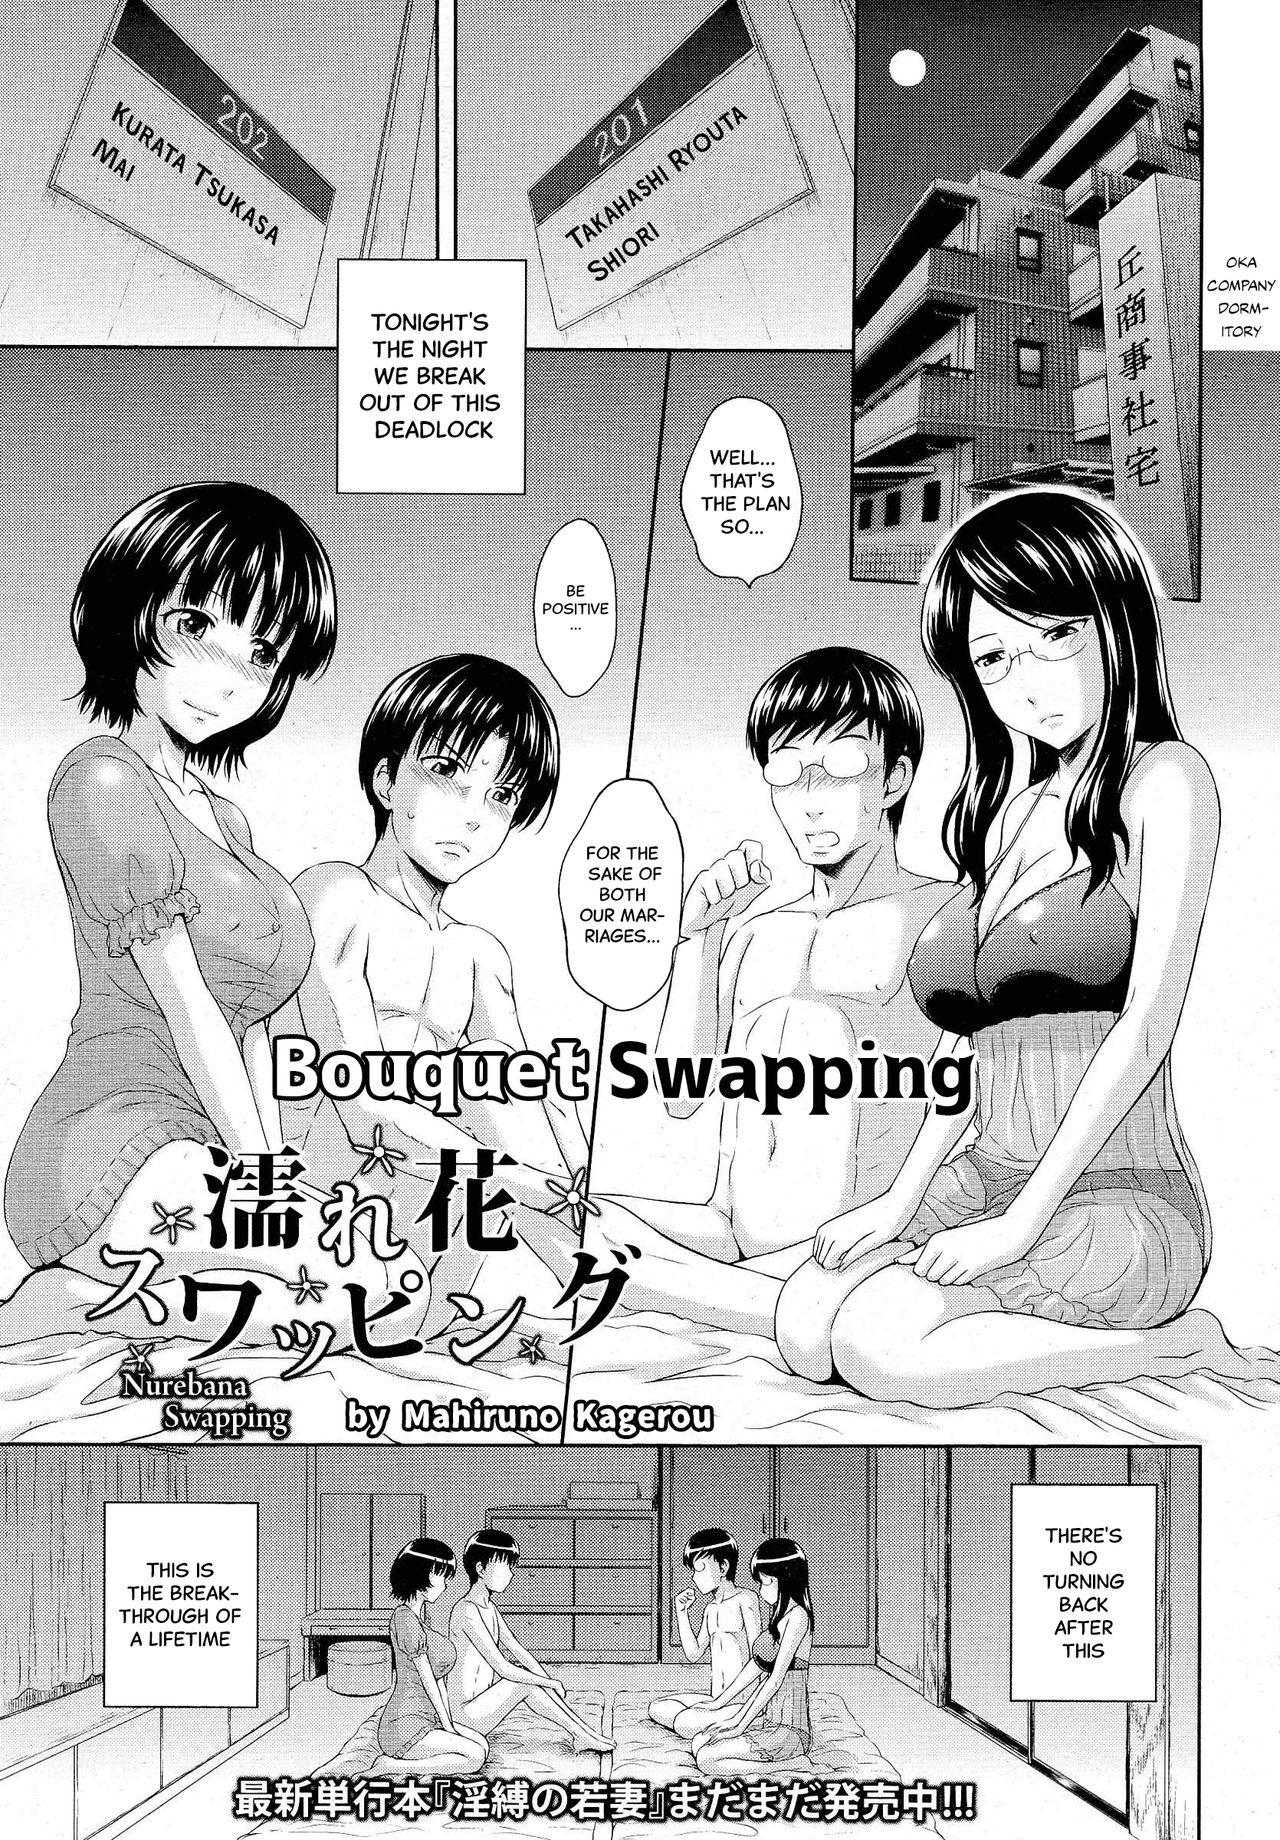 Nurebana Swapping | Bouquet Swapping 0